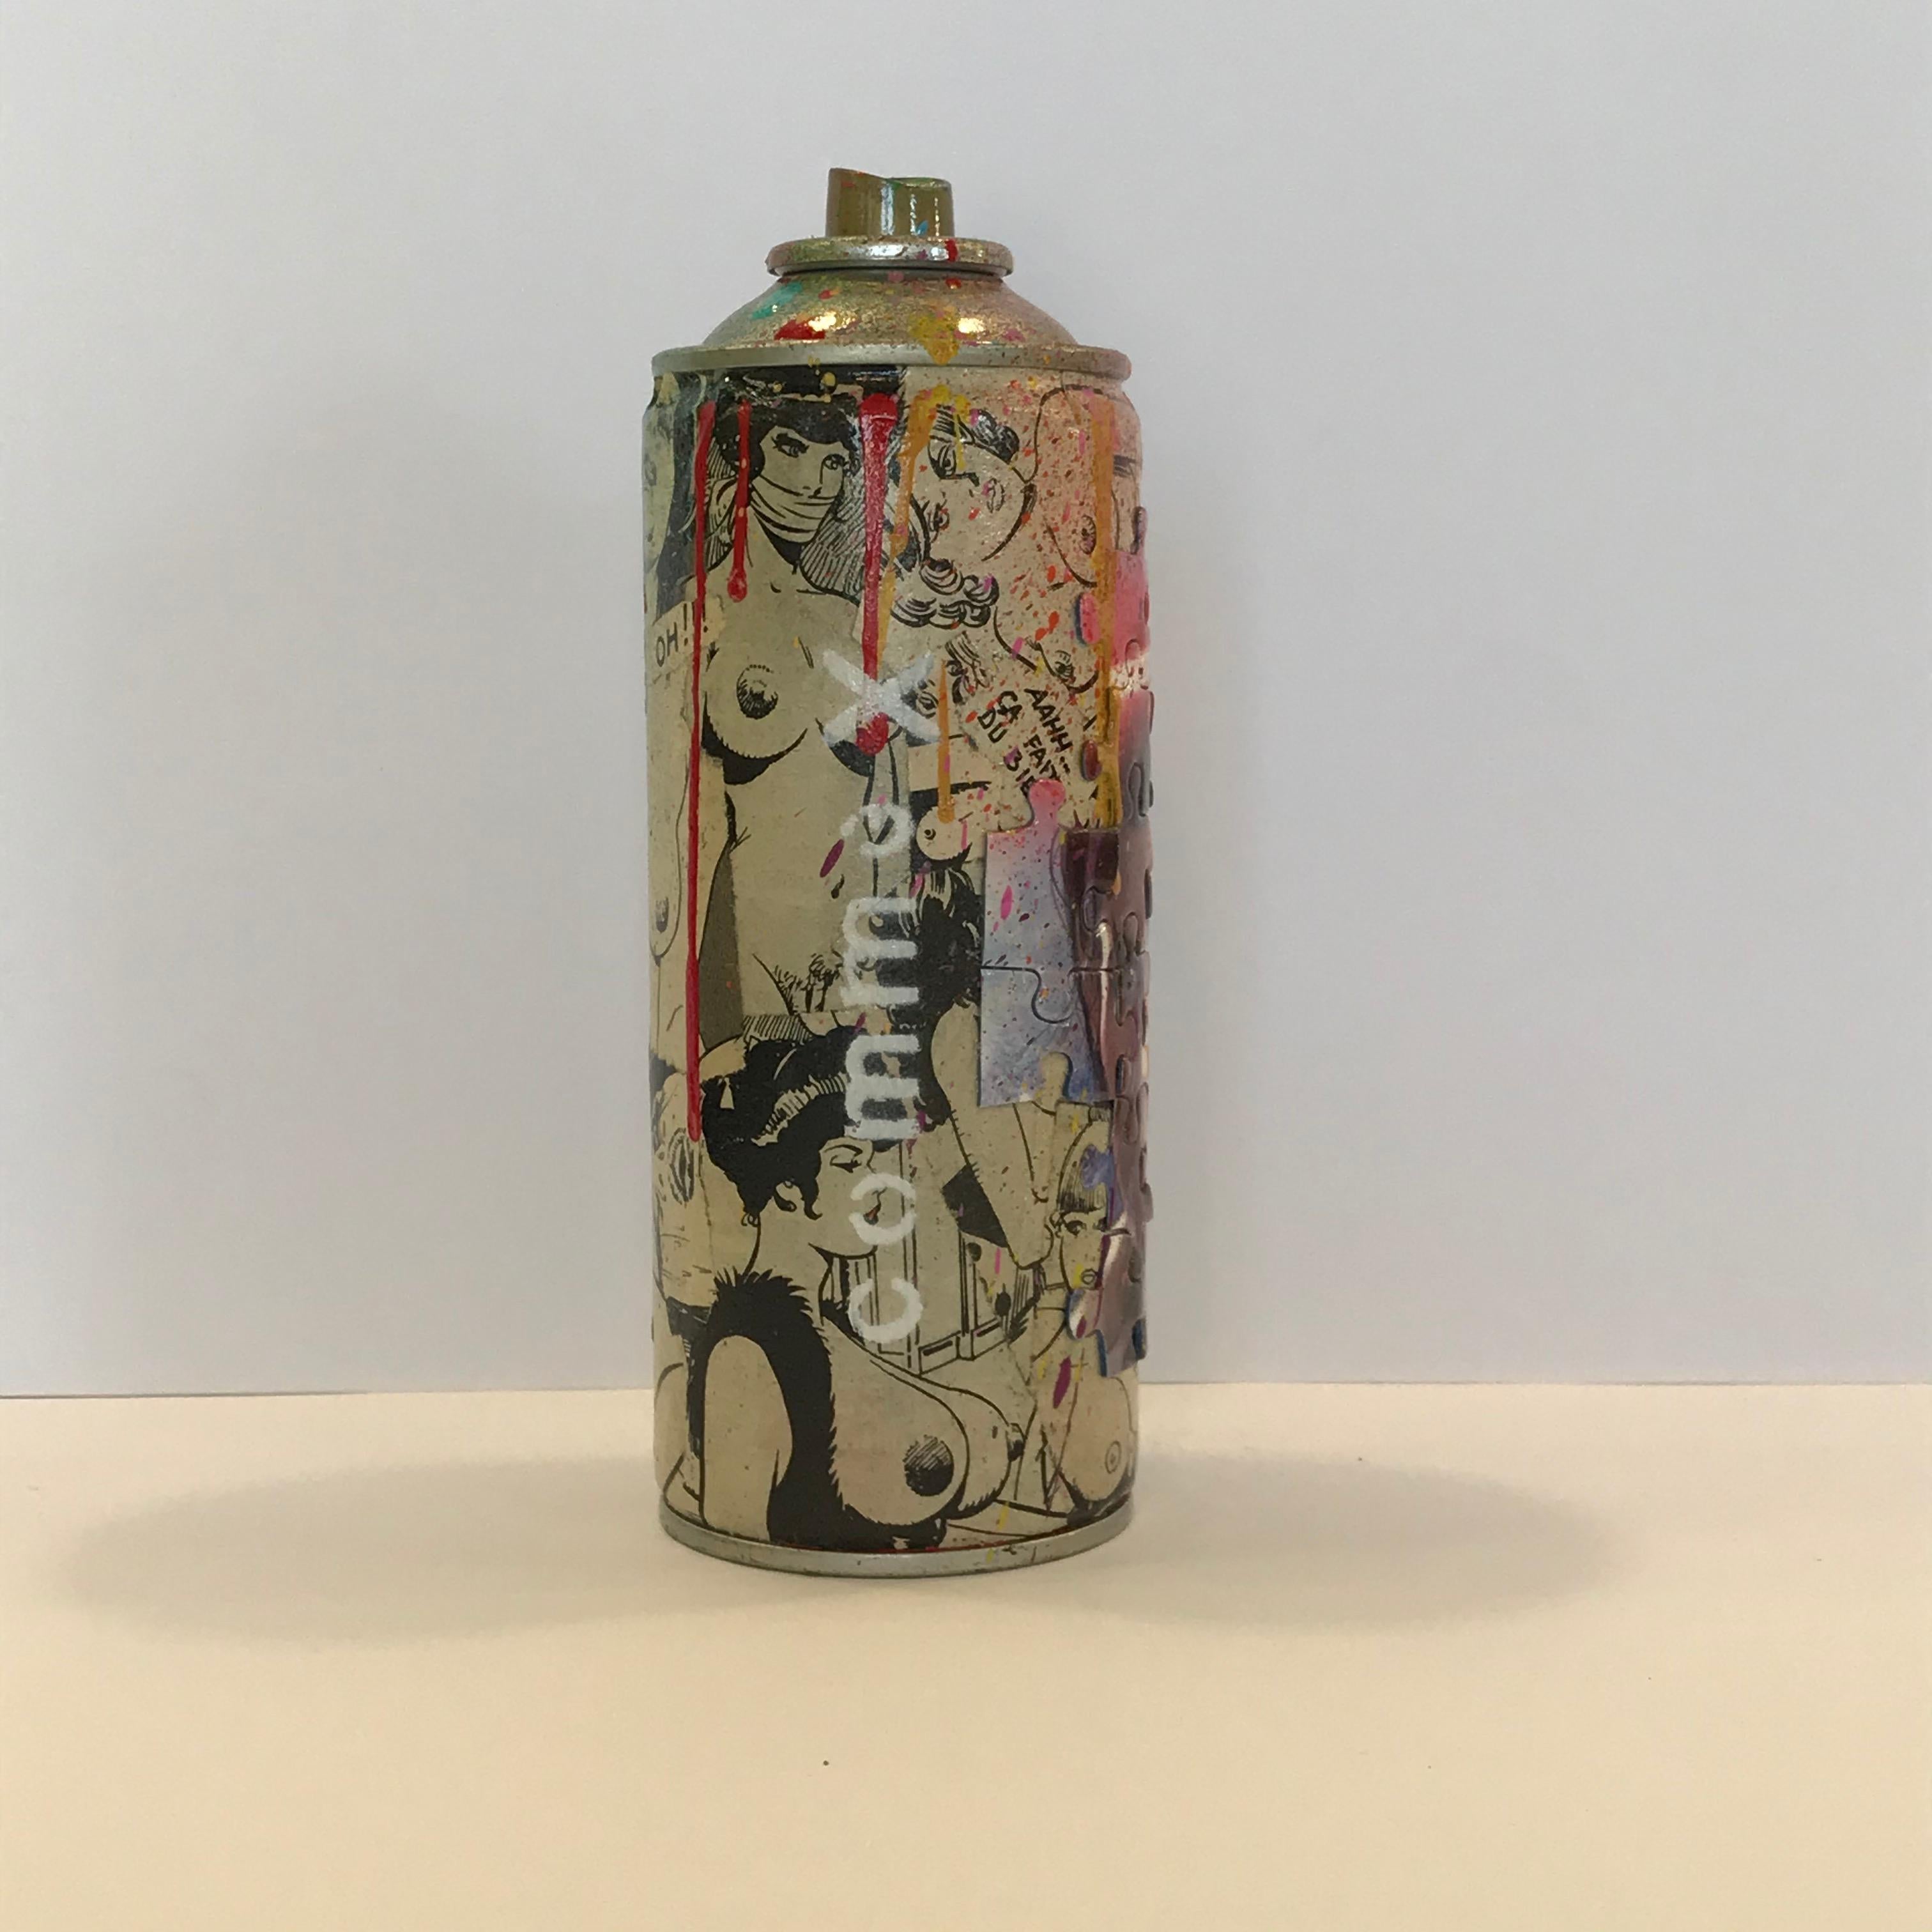 2021
collages of vignettes from erotic comics of the 70s and 80s, small formats and pieces of puzzles of characters from series or superheroes and trashing with spray cans.
on recycled aerosol can
Dimensions : 18 x 7 cm 
signed on the can on the